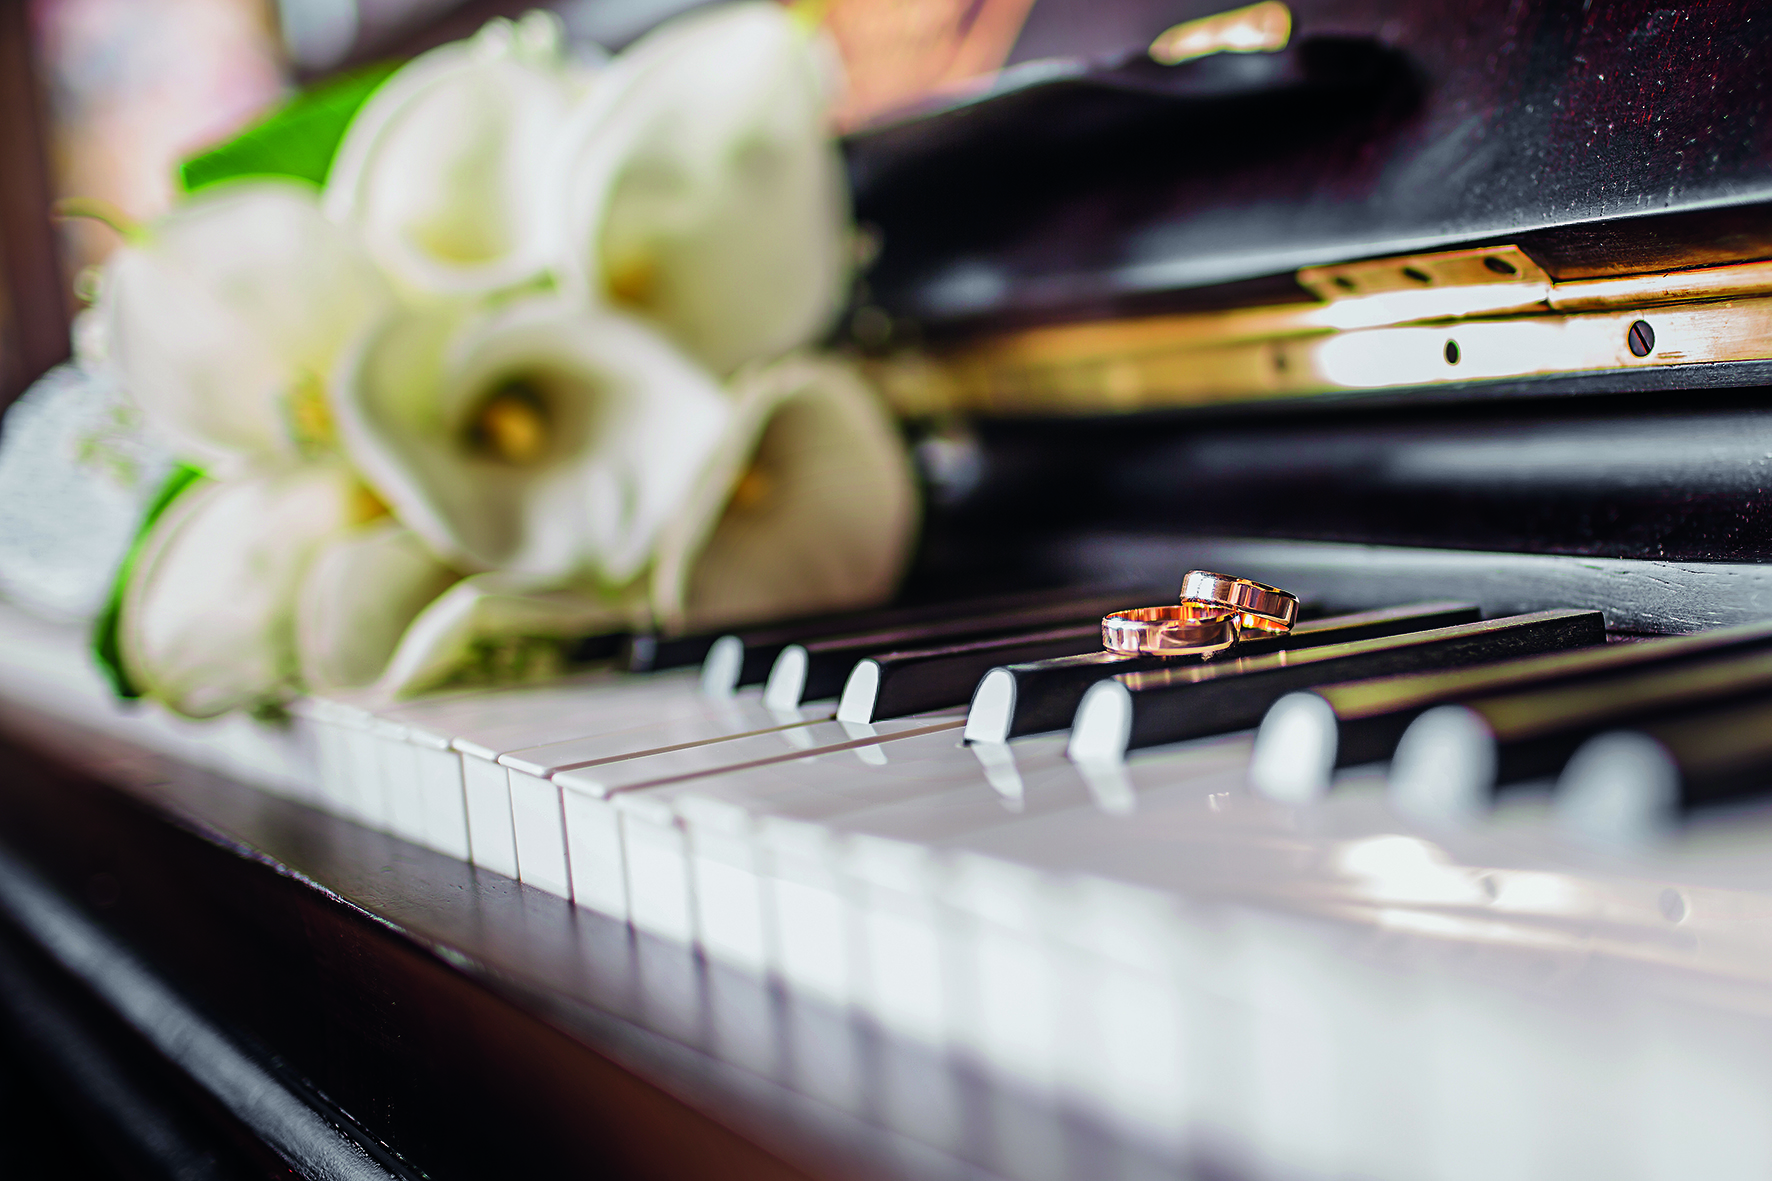 Wedding rings and a bouquet of white callas on the piano keys.